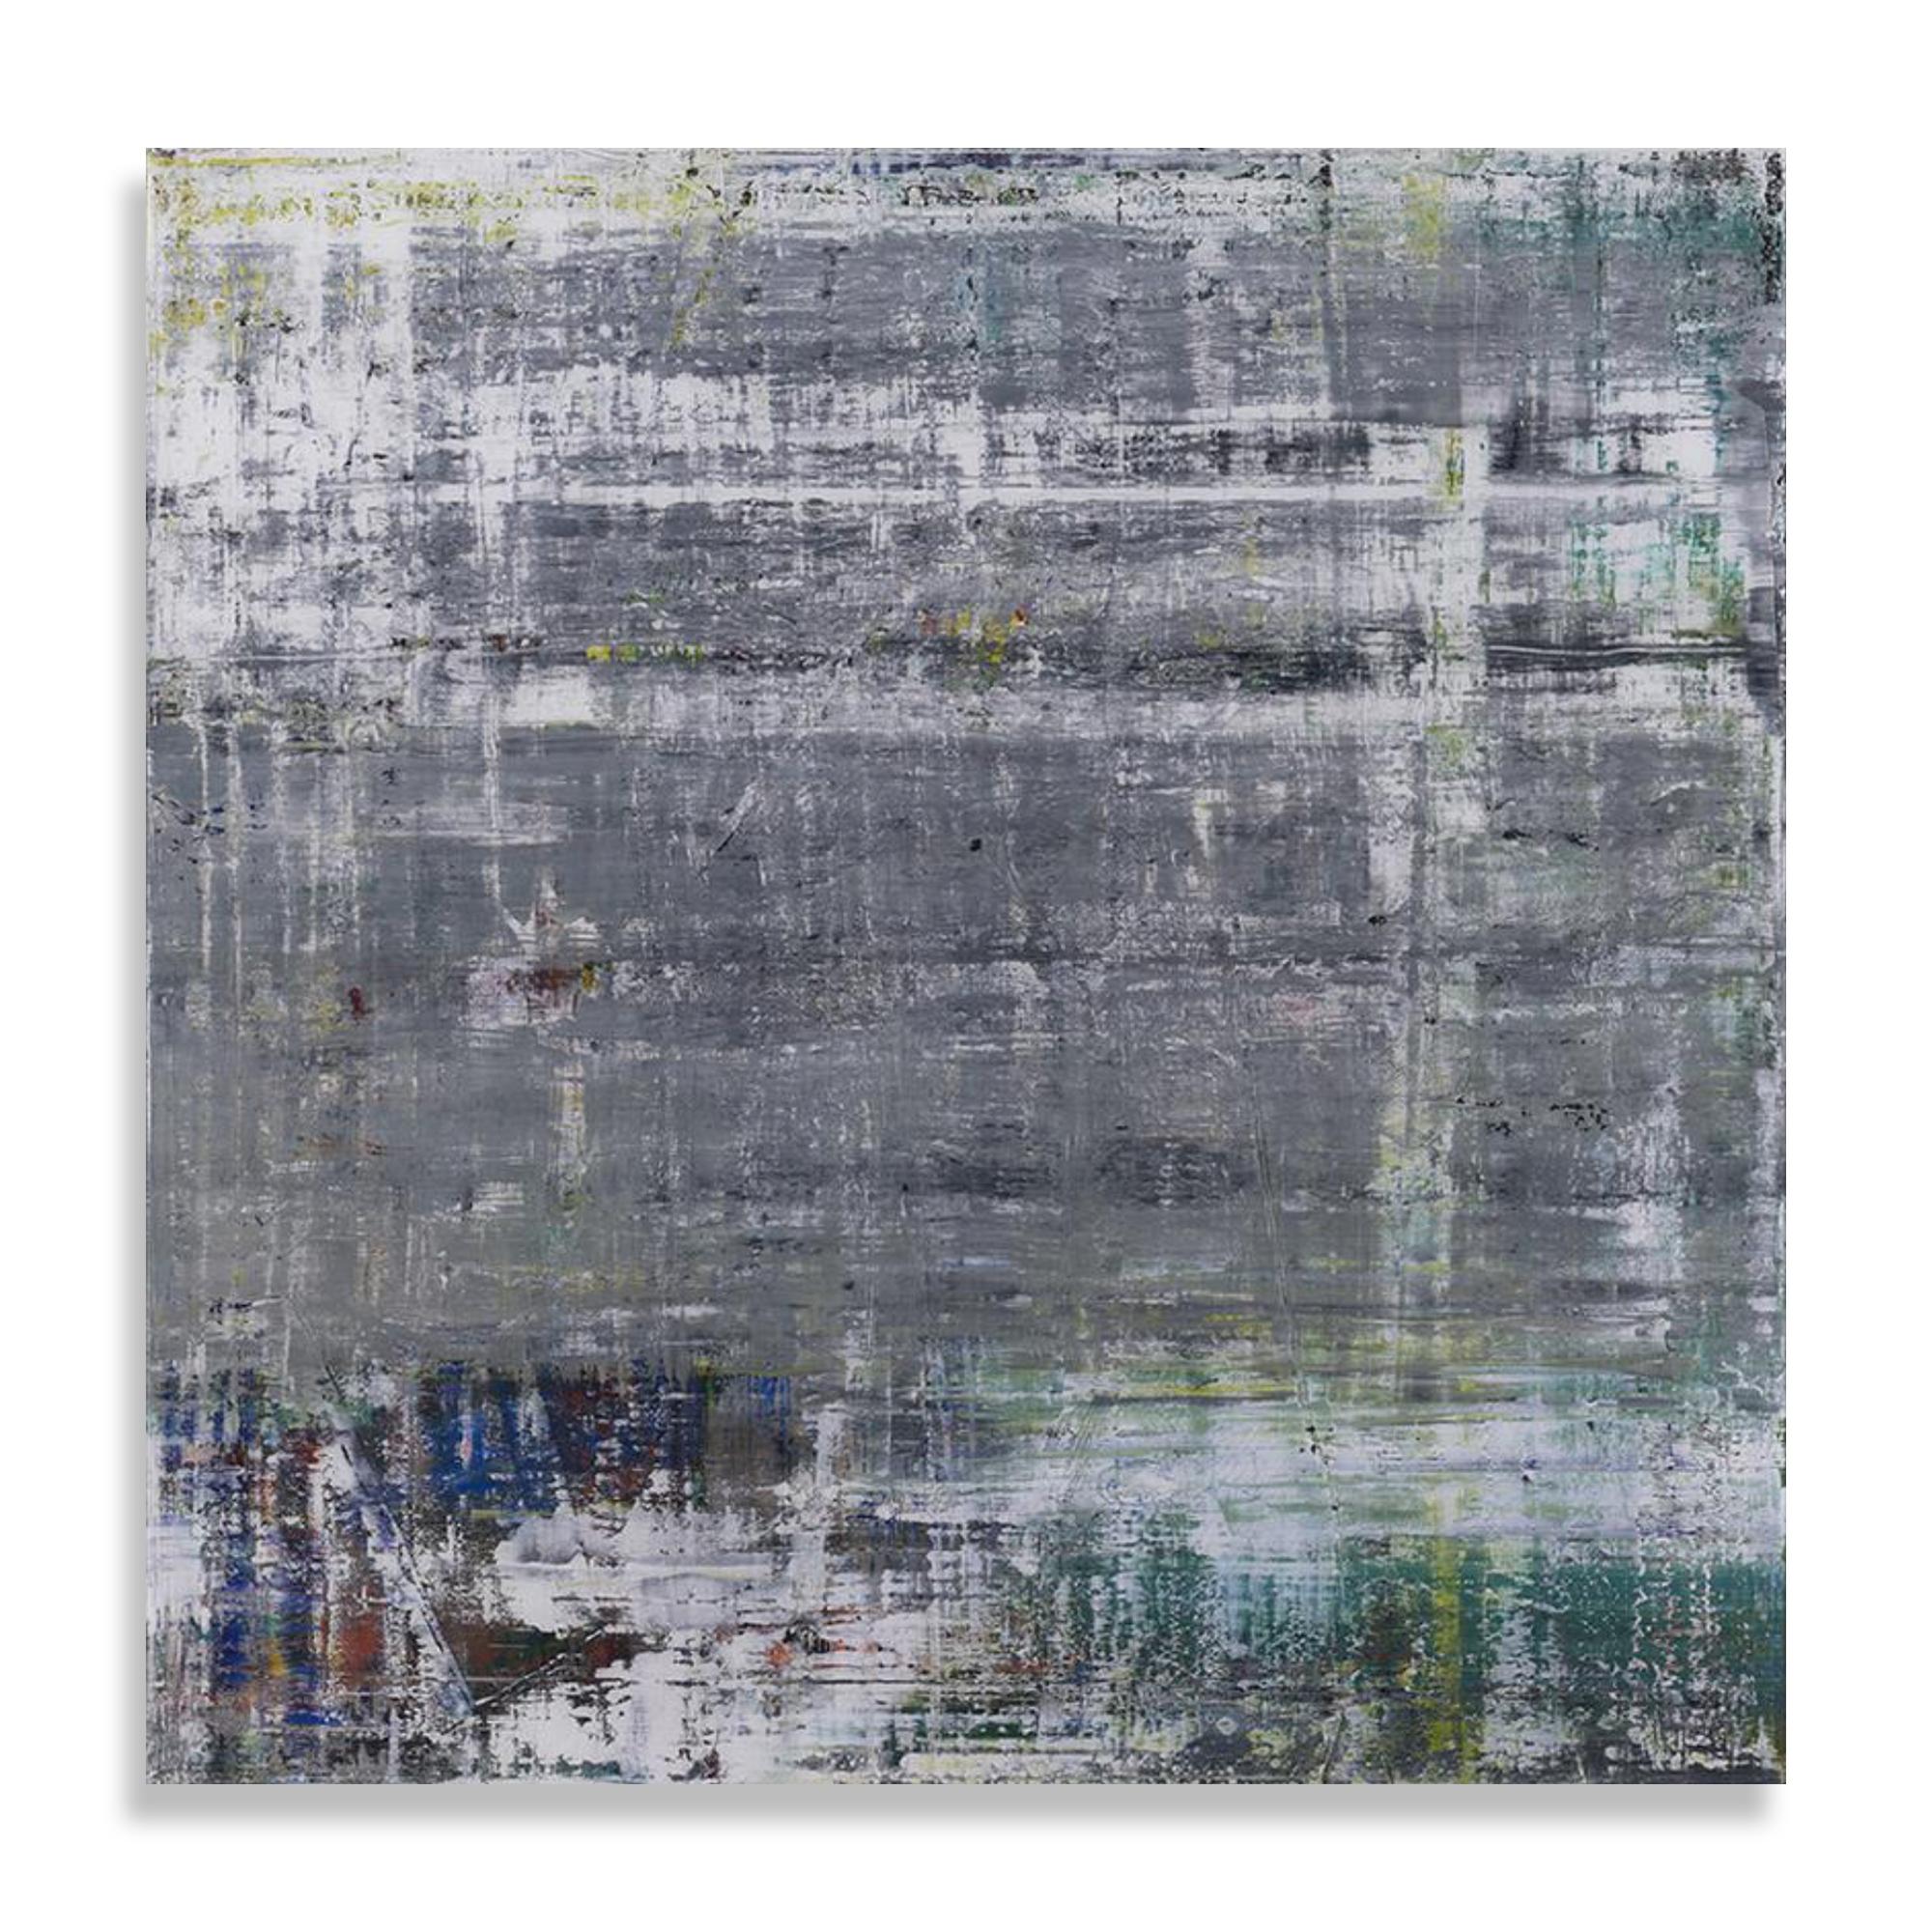 Gerhard Richter (German, b. 1932)
Cage P19-3, 2020
Medium: Diasec-mounted Giclée print on aluminium composite panel
Dimensions: 100 × 100 × 3 cm (39 2/5 × 39 2/5 × 1 1/5 in)
Edition of 200: Numbered and labelled on verso; unsigned, as